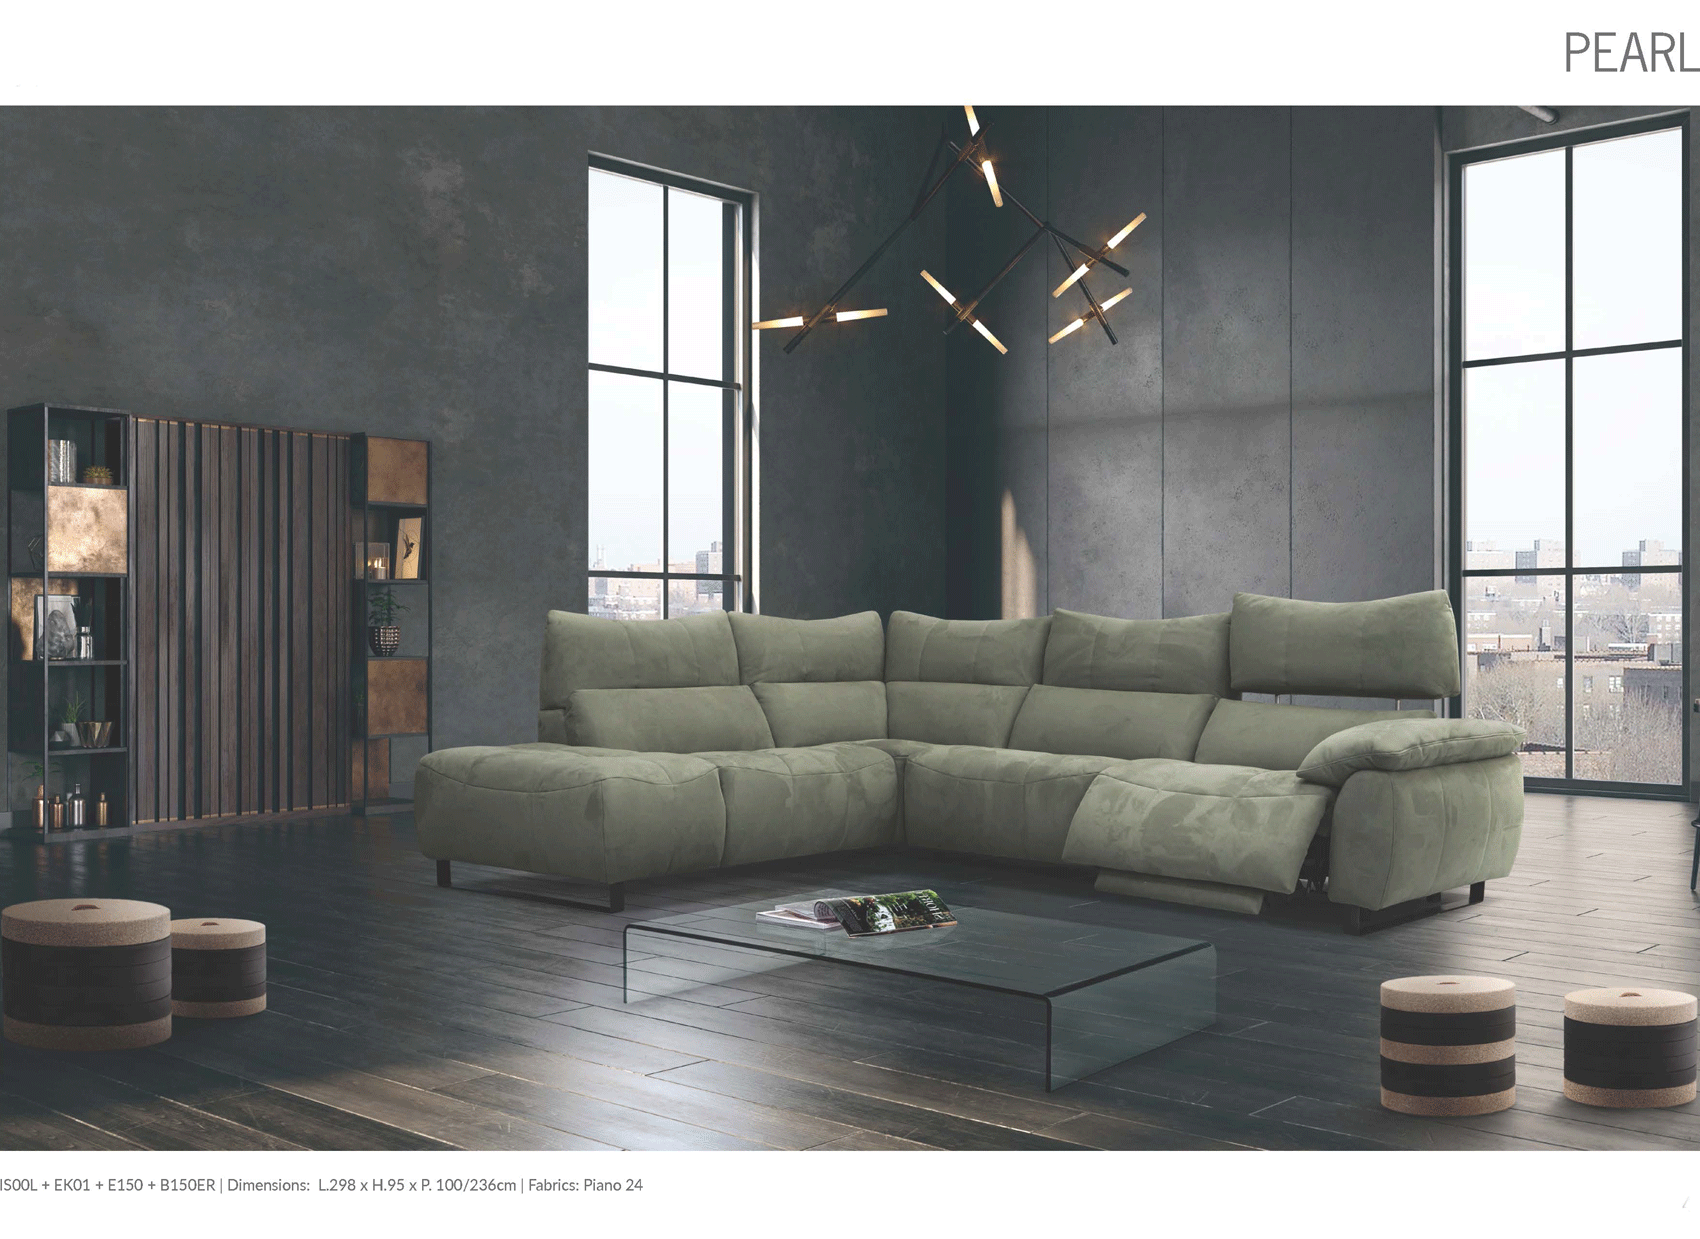 Living Room Furniture Reclining and Sliding Seats Sets Pearl Sectional